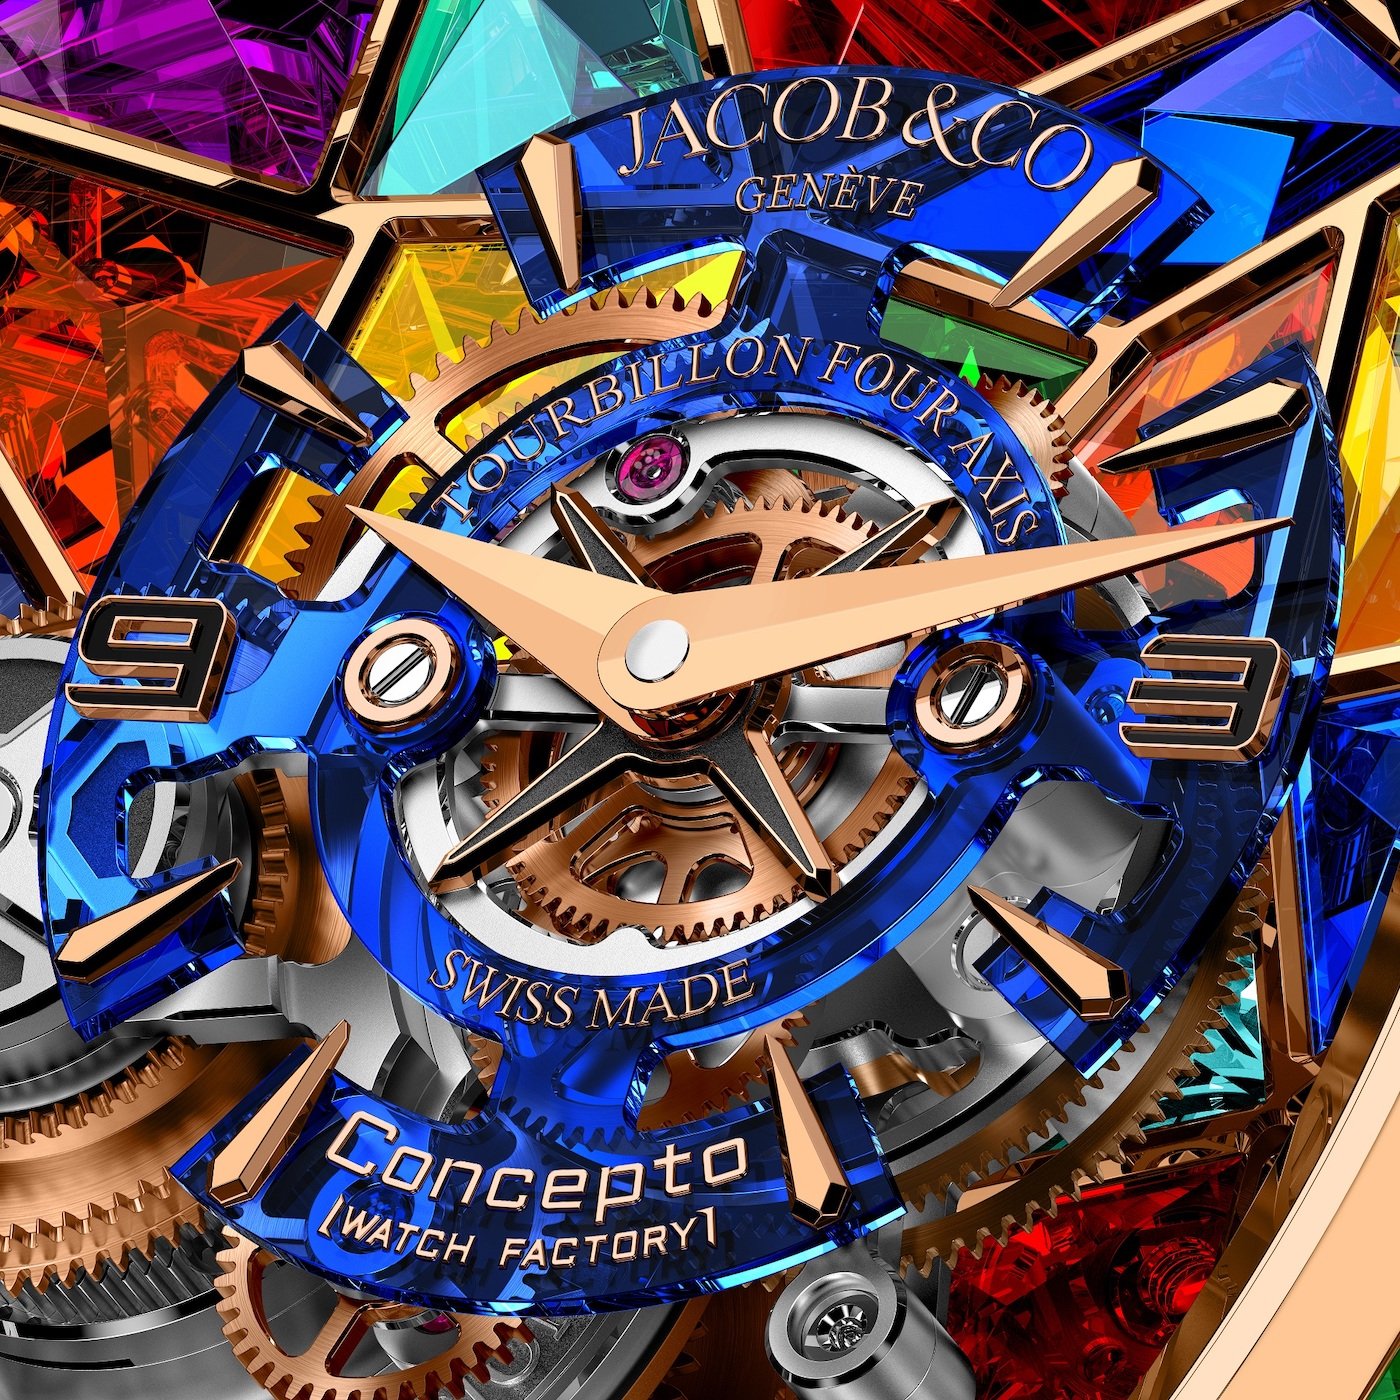 Jacob & Co. and Concepto join forces for Only Watch